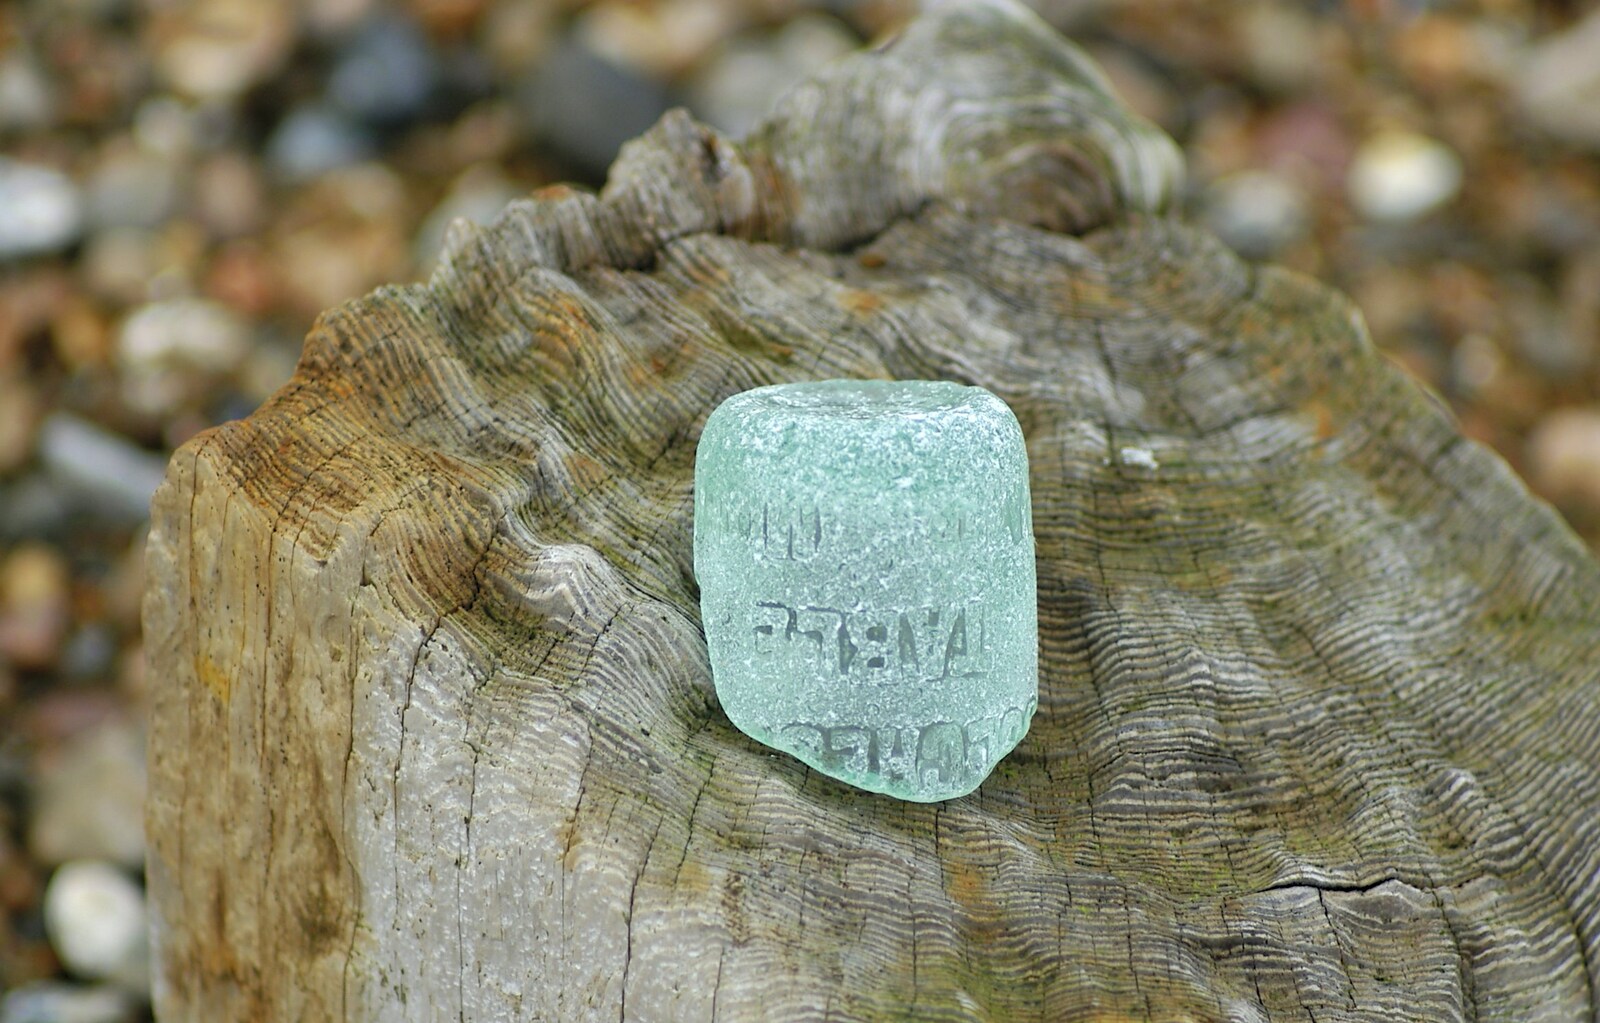 A nice piece of eroded glass on a wooden stump from A Trip to East Lane, Bawdsey, Suffolk - 28th November 2004